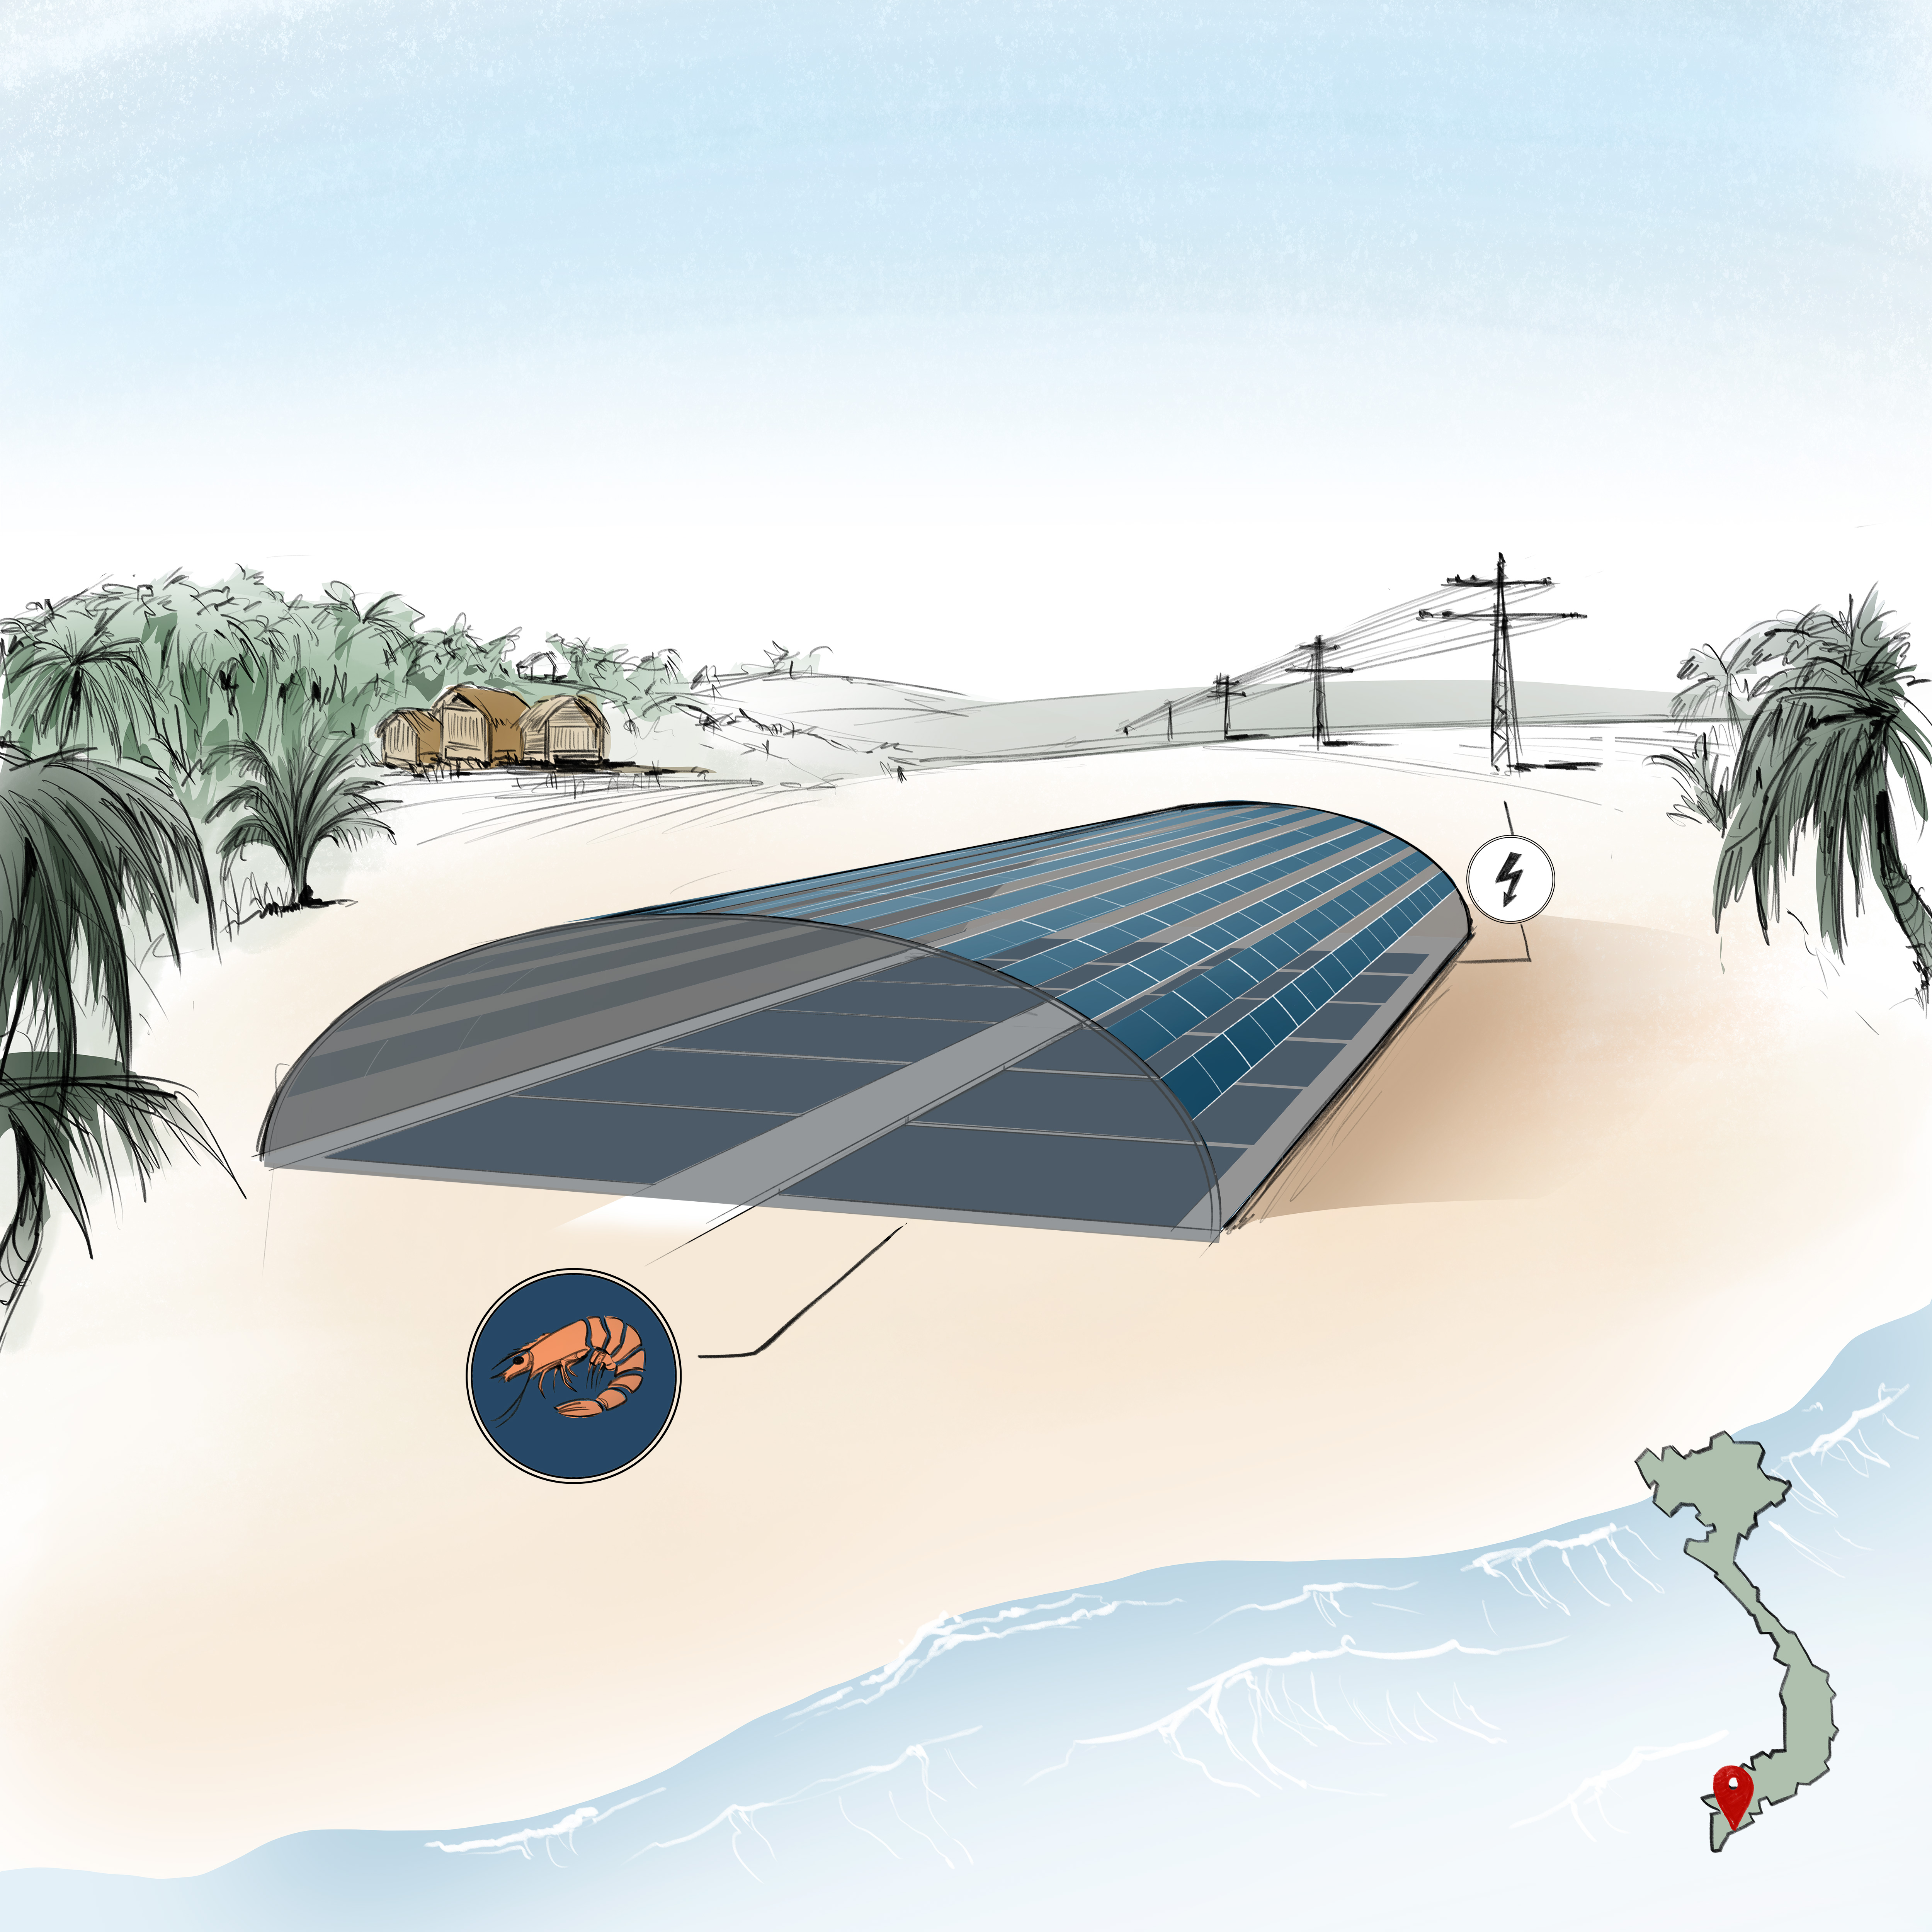 Sketch of the planned photovoltaic greenhouse for shrimps in Bac Lieu.